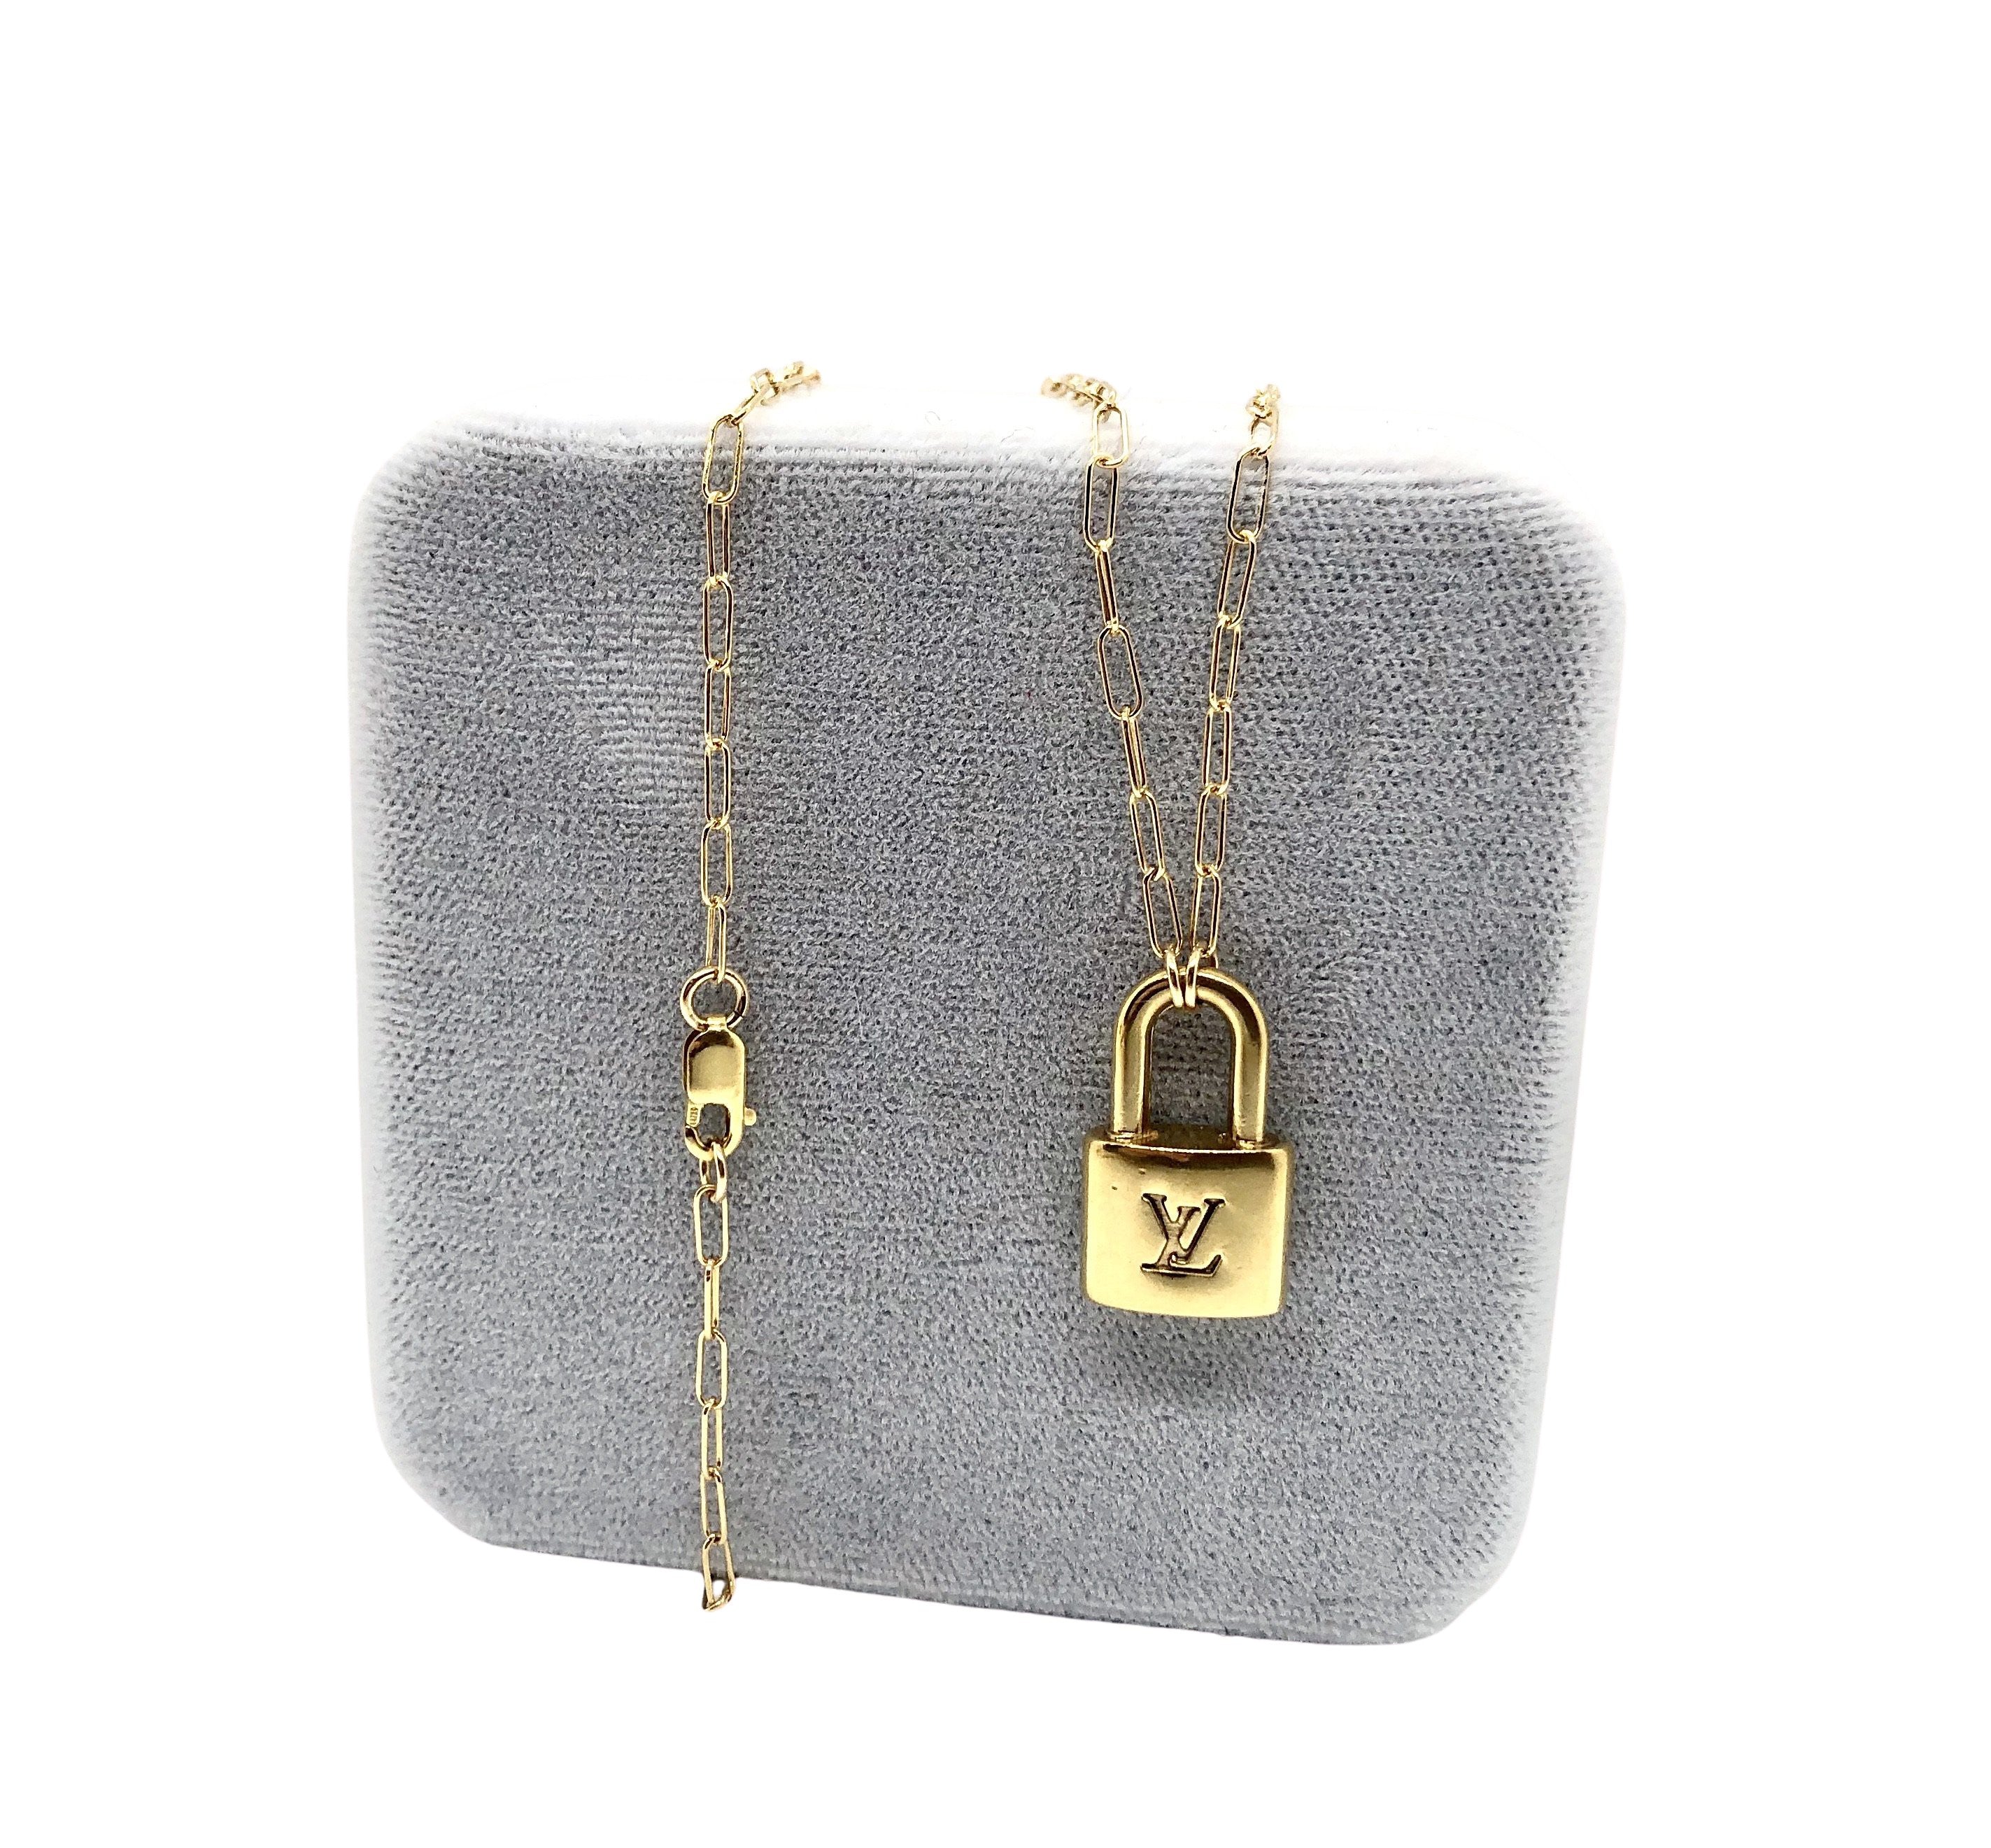 Authentic Louis Vuitton Repurposed Beige Gold Miss LV Necklace — LUXE  Reworked